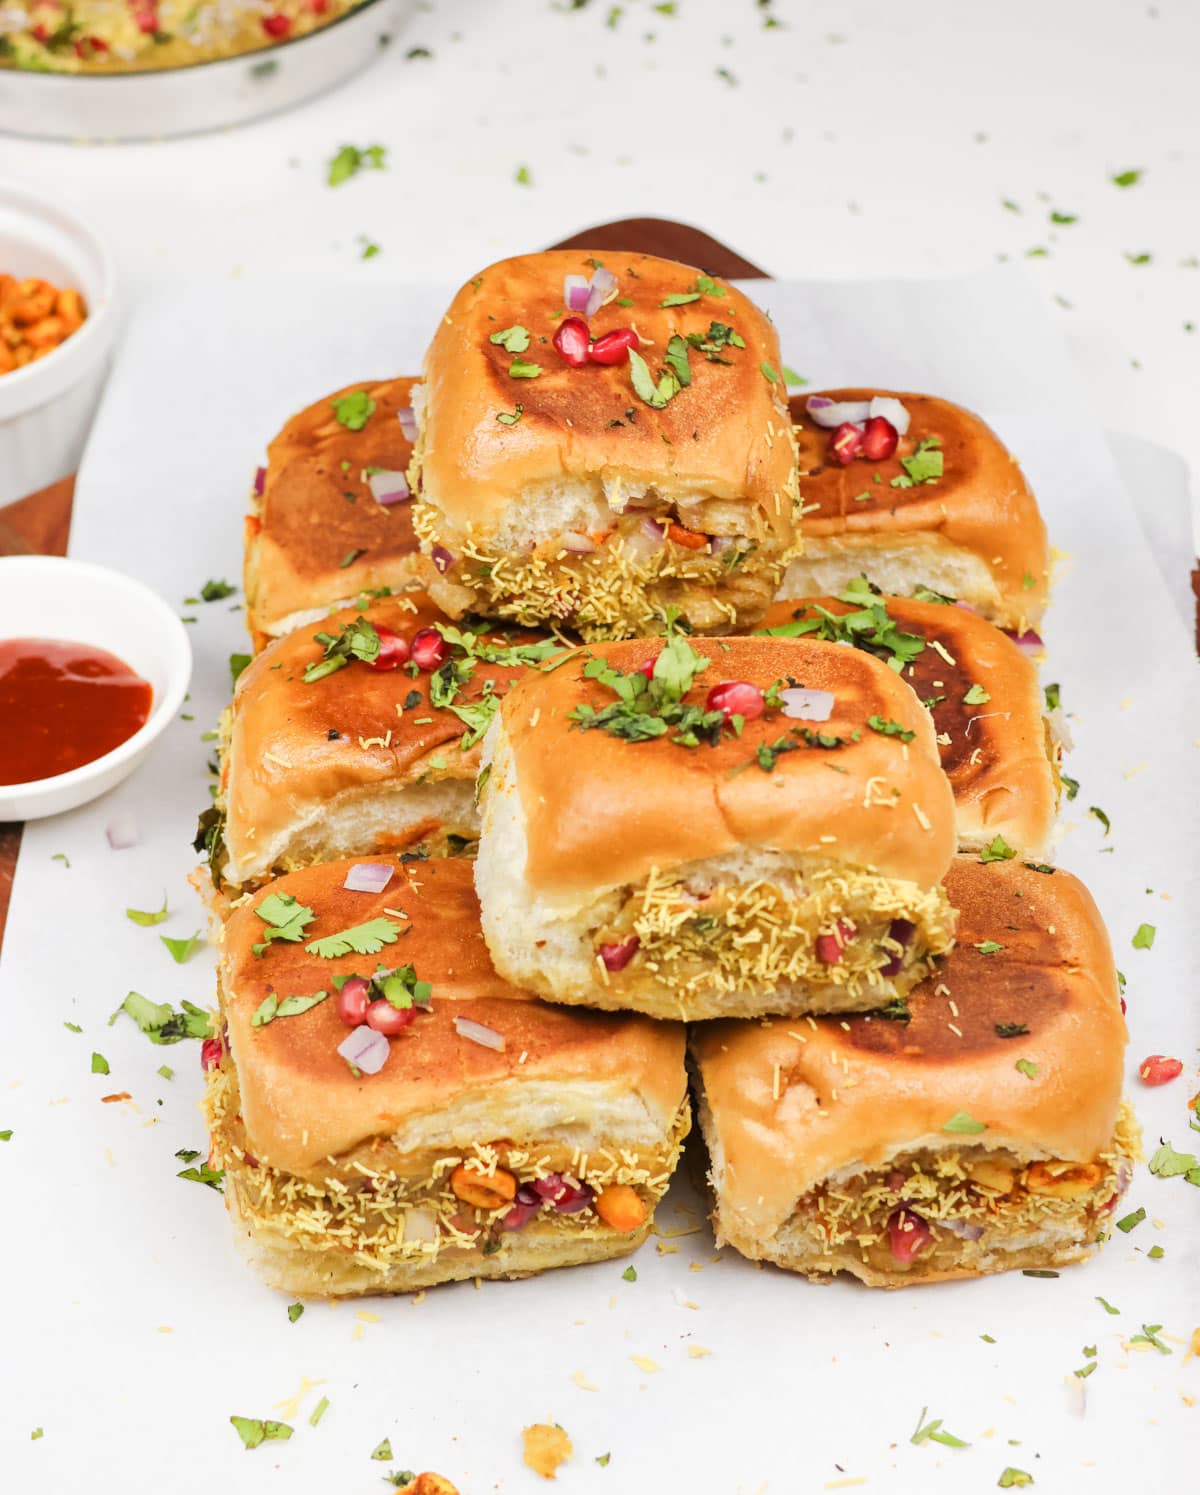 kachchhi dabeli served on a tray garnished with cilantro leaves, sev, peanuts and pomegranate seeds.